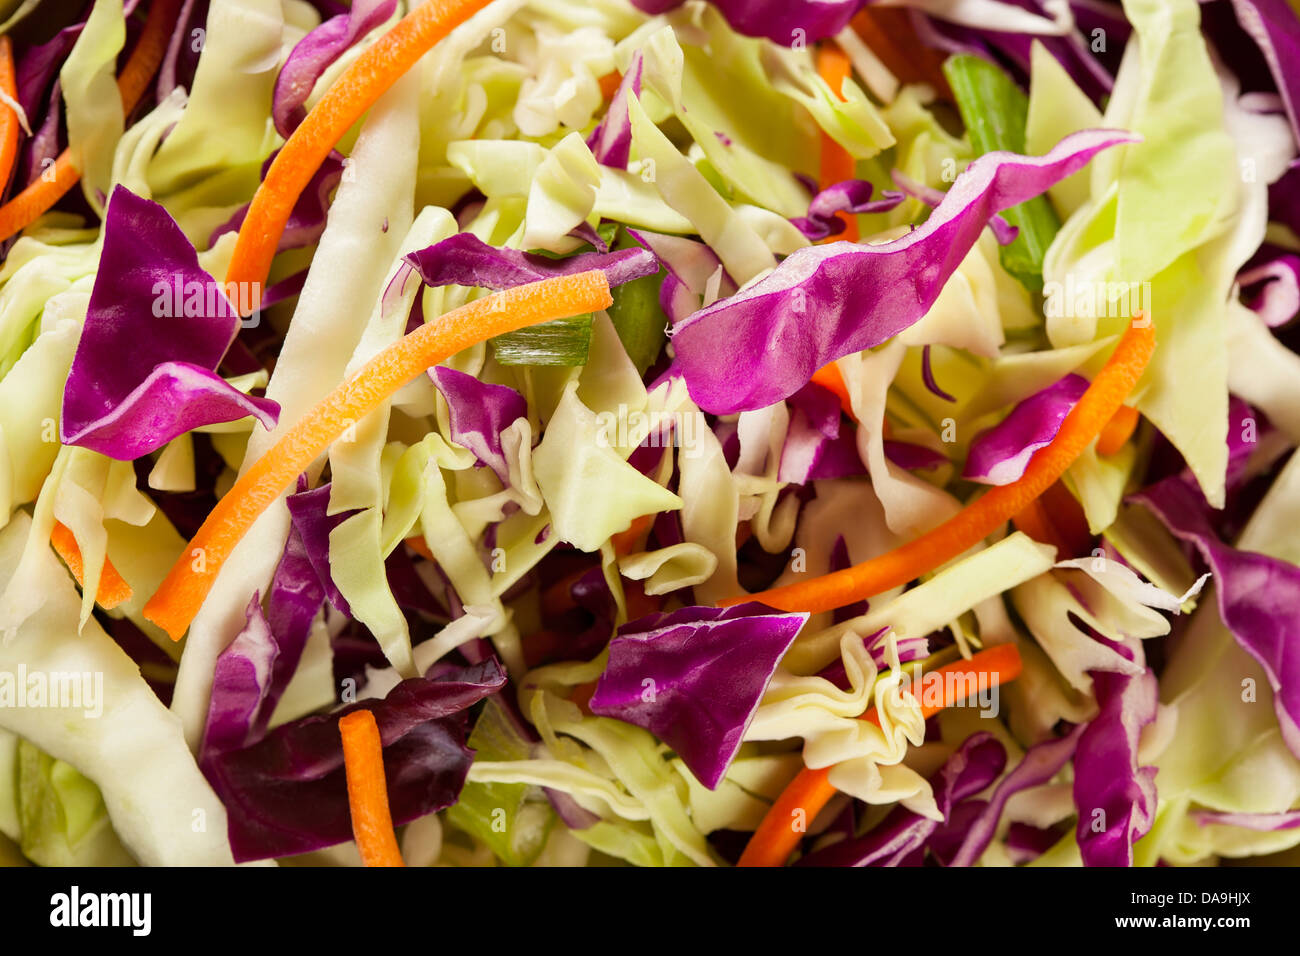 Homemade Coleslaw with Shredded Cabbage, Carrots, and Lettuce Stock Photo